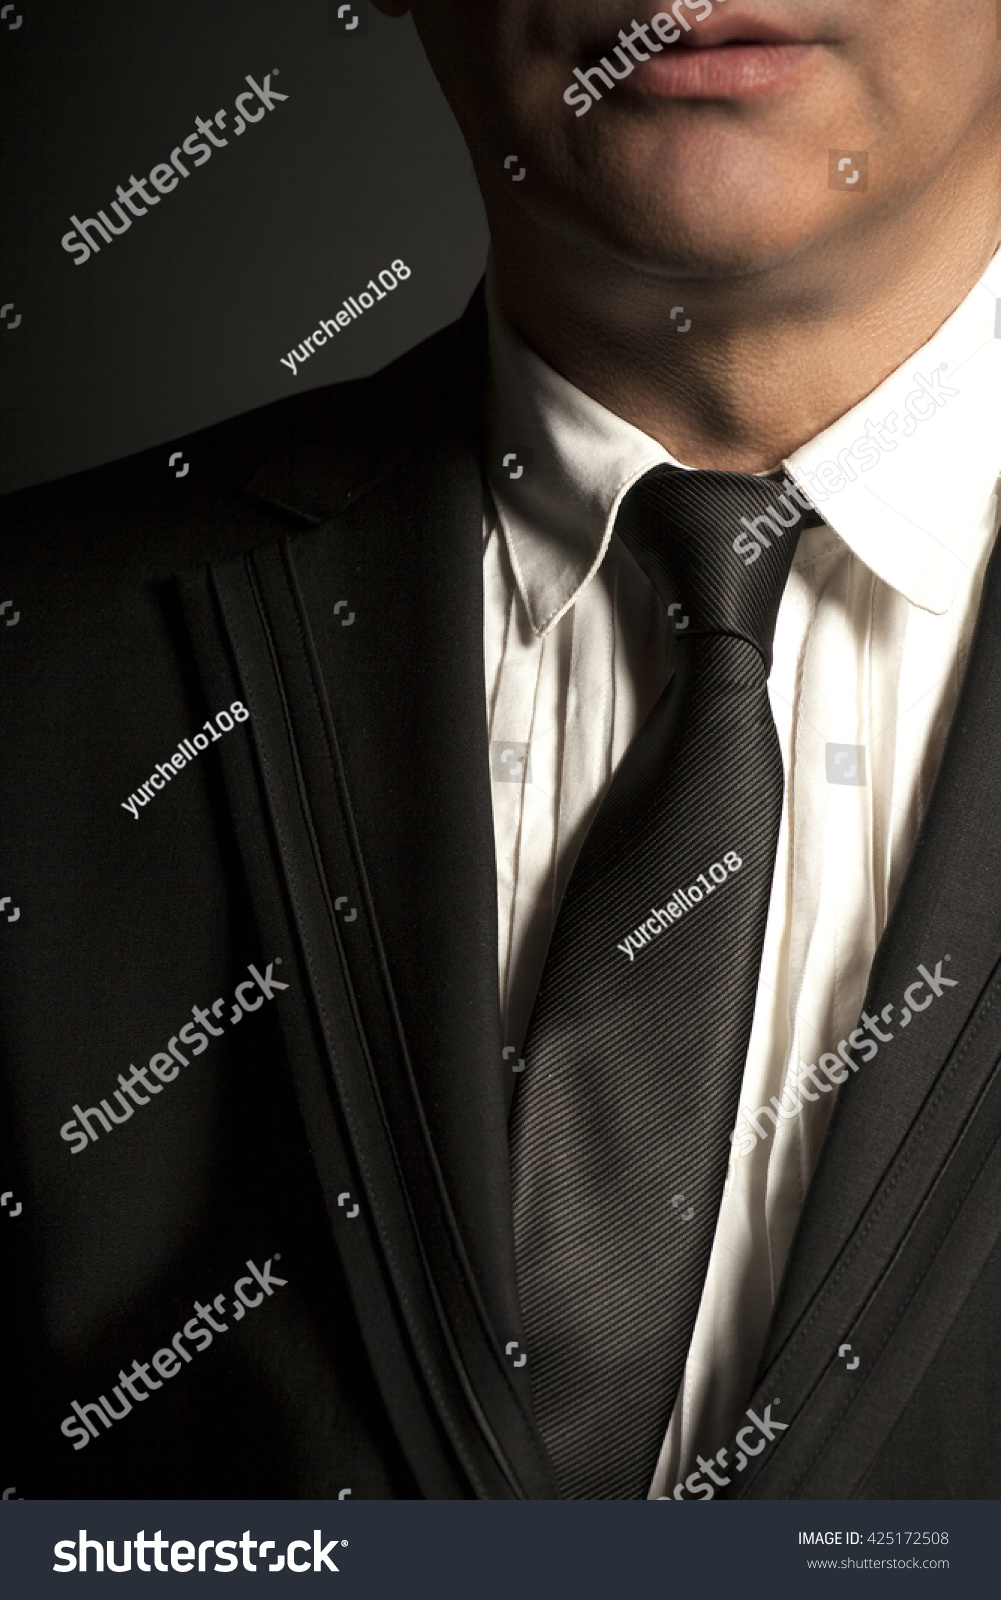 Man In Black Suit And Black Tie On A Black Background Stock Photo ...